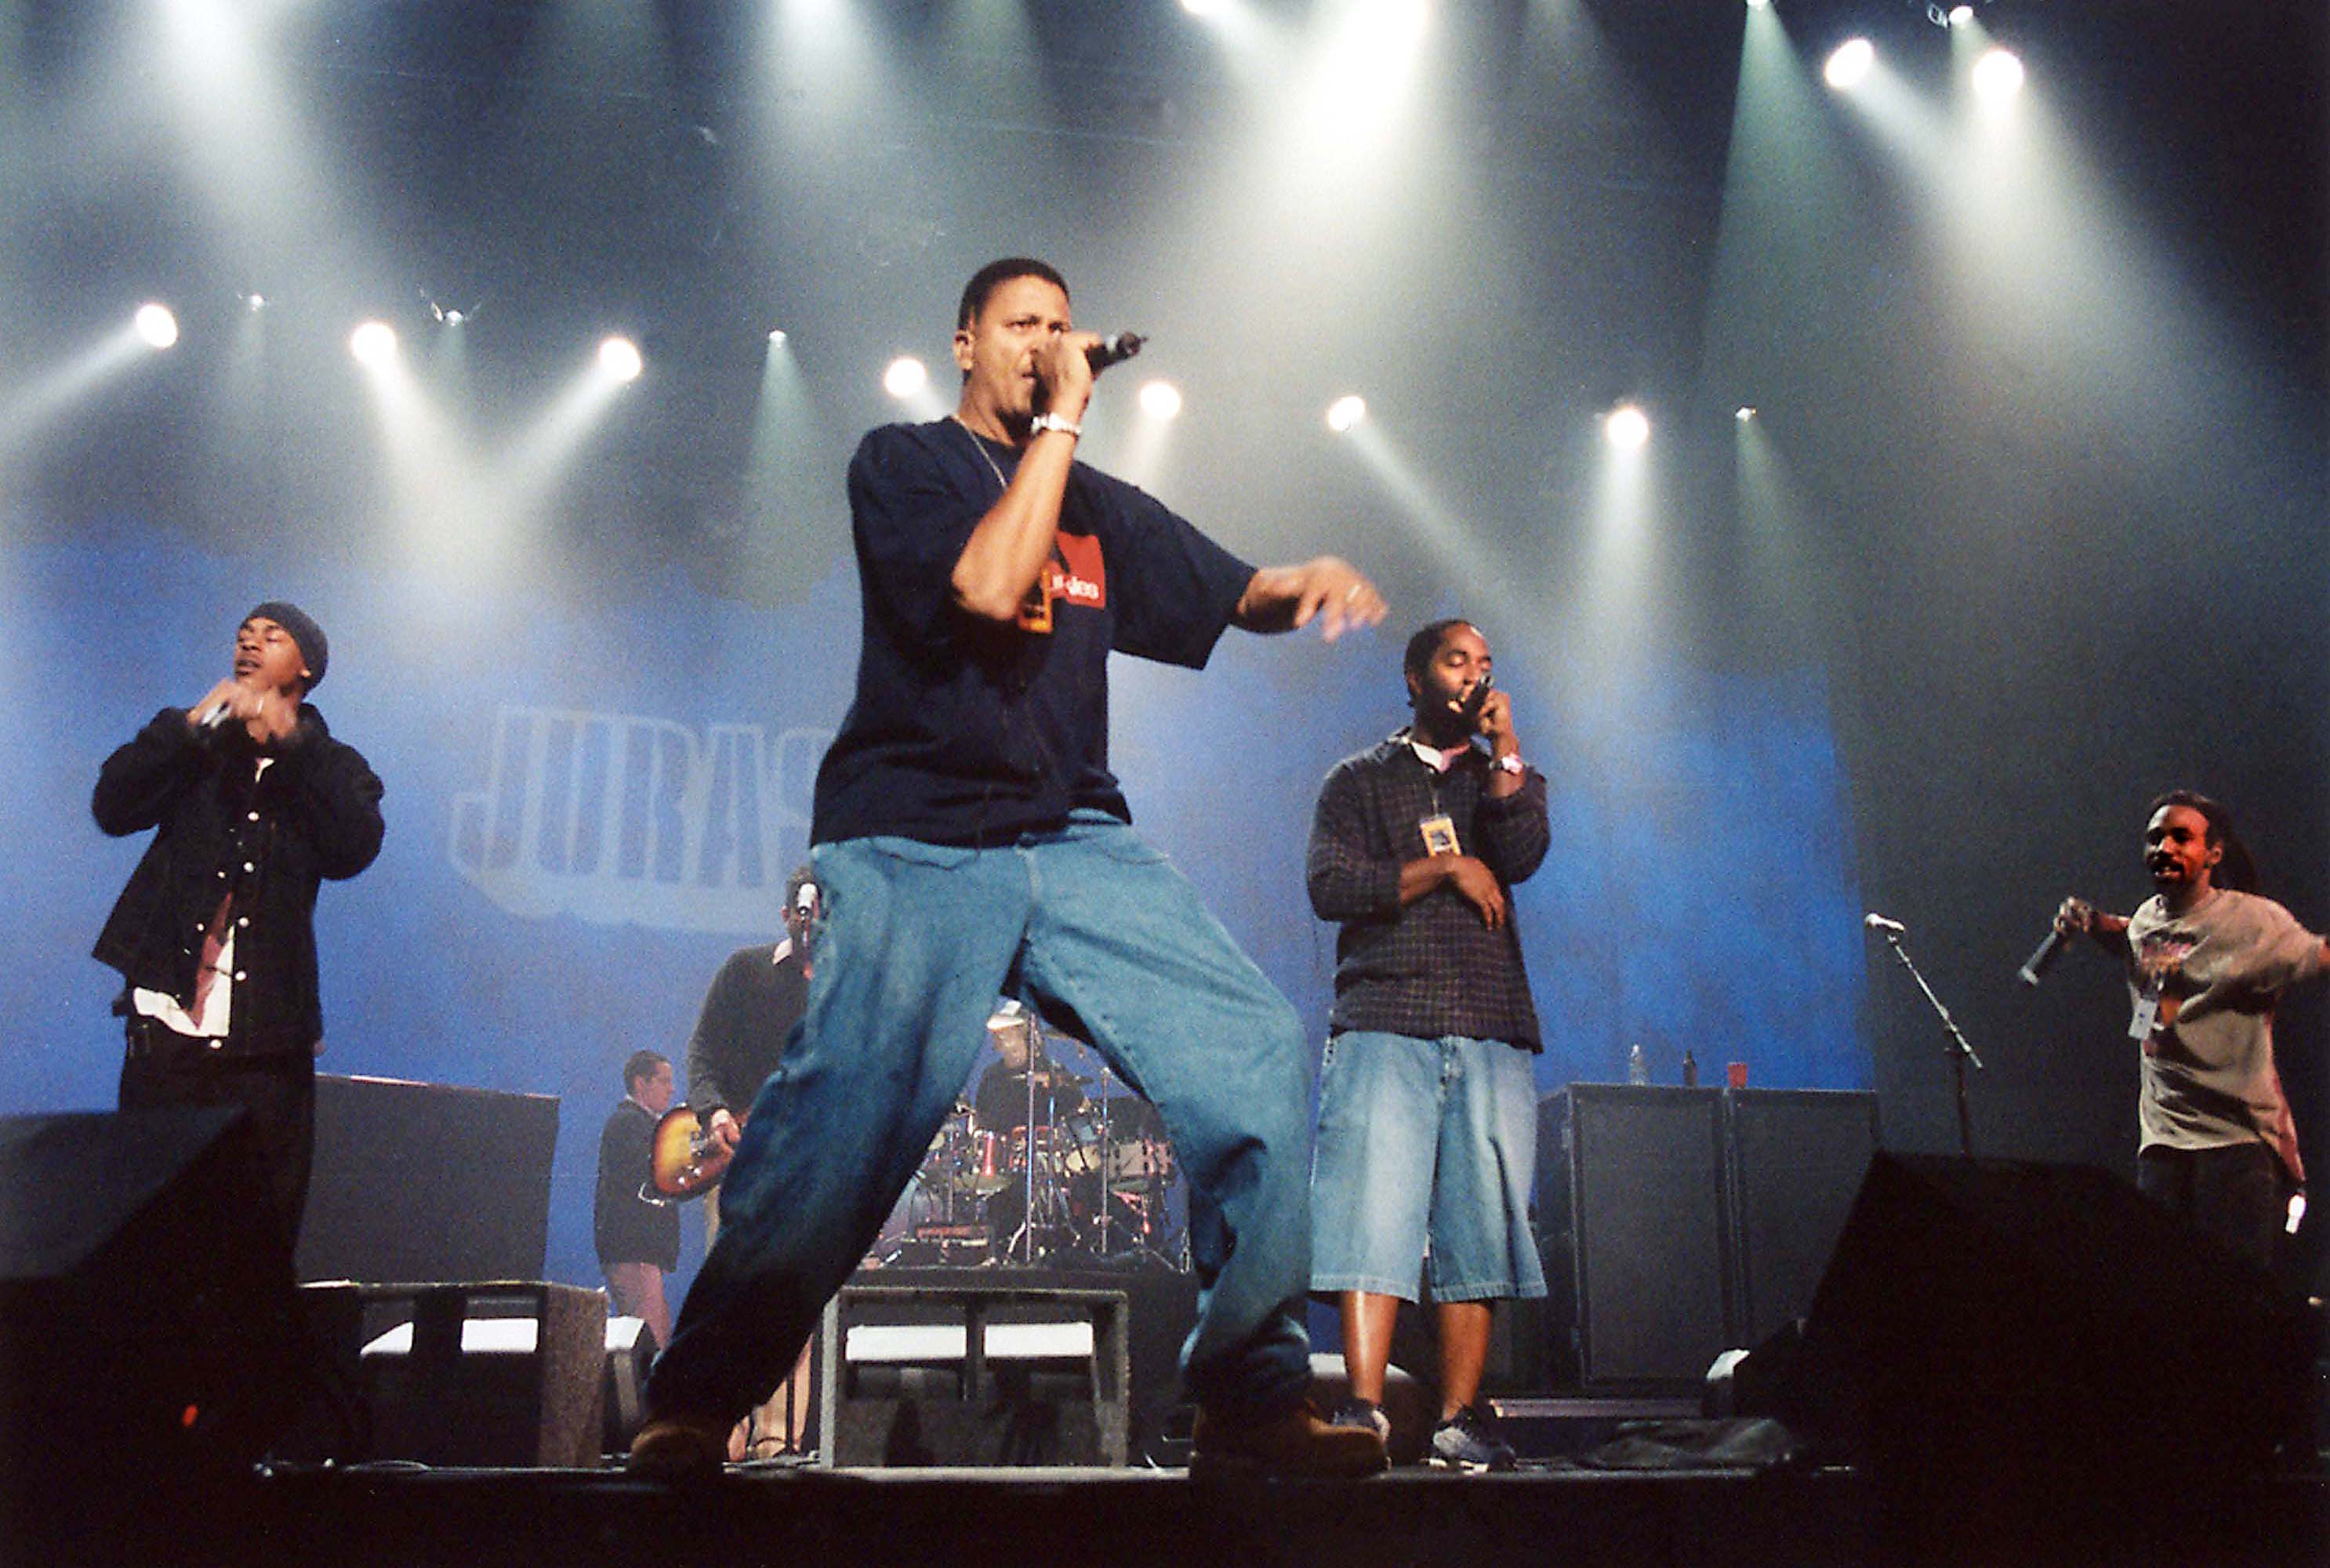 Great Expectations: An Oral History of Jurassic 5's <i>
<h2></h2>
<h2><strong>Reception</strong></h2>
<p> </p>
<p><strong>Dan Dalton:</strong> There was a lot of pressure on whether or not we were going to change. That I remember. We answered the calling and nobody bailed. Nobody thought we sold out. We were still Jurassic 5, just with better distribution and a better team.</p>
<p><strong>Cut Chemist:</strong> We wanted to do it our way and this was the result, which were better results than most people get from doing it your way on a major record label. I think we may be the shining example, the best-case scenario, of having your cake and kind of eating it, too. The machine got behind it and we had 100% creative control. Usually, when you have 100% creative control they’re like, “Fuck this record,” and they’re not going to work it.</p>
<p><strong>Soup:</strong> It was a slow burn. It didn’t take off. And at that time, first week sales was a big thing. We didn’t place high, but we didn’t place low. I’m looking at Billboard right now. We went to 43 and R&B/hip hop albums we were at 33. We were above 50. It would have been dope if we were like 10 or something, but that wasn’t bad… We just wanted to come out. We didn’t know nothing about first-week sales and we didn’t care anything about that. That was for the record label to worry about.</p>
<p><strong>Cut Chemist:</strong> The weird thing about the success of “Quality Control” is that I could feel the machine behind it. I was like, “This isn’t an organic thing.” It’s not the kind of song that is cracking on the mainstream. Yet it was on mainstream platforms. On Power 106 or 92.3 had “Quality Control” going up against Jay-Z songs. And it was winning. I was like, “What?!” We were on some MTV show. It was on some <i>TRL-type</i> shit. Girls were dancing to “Quality Control” when we were up there performing and I was like, “This is surreal. This is weird. You guys don’t normally dance to shit that sounds like this.” It was cool, but it was so different from what was going on at the time.</p>
<p><strong>B+:</strong> There’s a lot of Good Lifers out there that would be delighted to point out to you that both Snoop Dogg and Bone Thugs-N-Harmony came through. But as far as groups that were concerned with the core tenets of The Good Life, I think it’s a fair point to be made that Jurassic had the most successful career.</p>
<p><strong>Marc 7:</strong> We’re still seeing residuals from the record to this day, so it’s doing alright. We were so busy. We toured for years. There’s not many groups that can go silent, go dark for five or six years and come back and just tour like nothing ever happened. We’re one of those groups that can do that.</p>
</p></p>  </div>
  <div class=